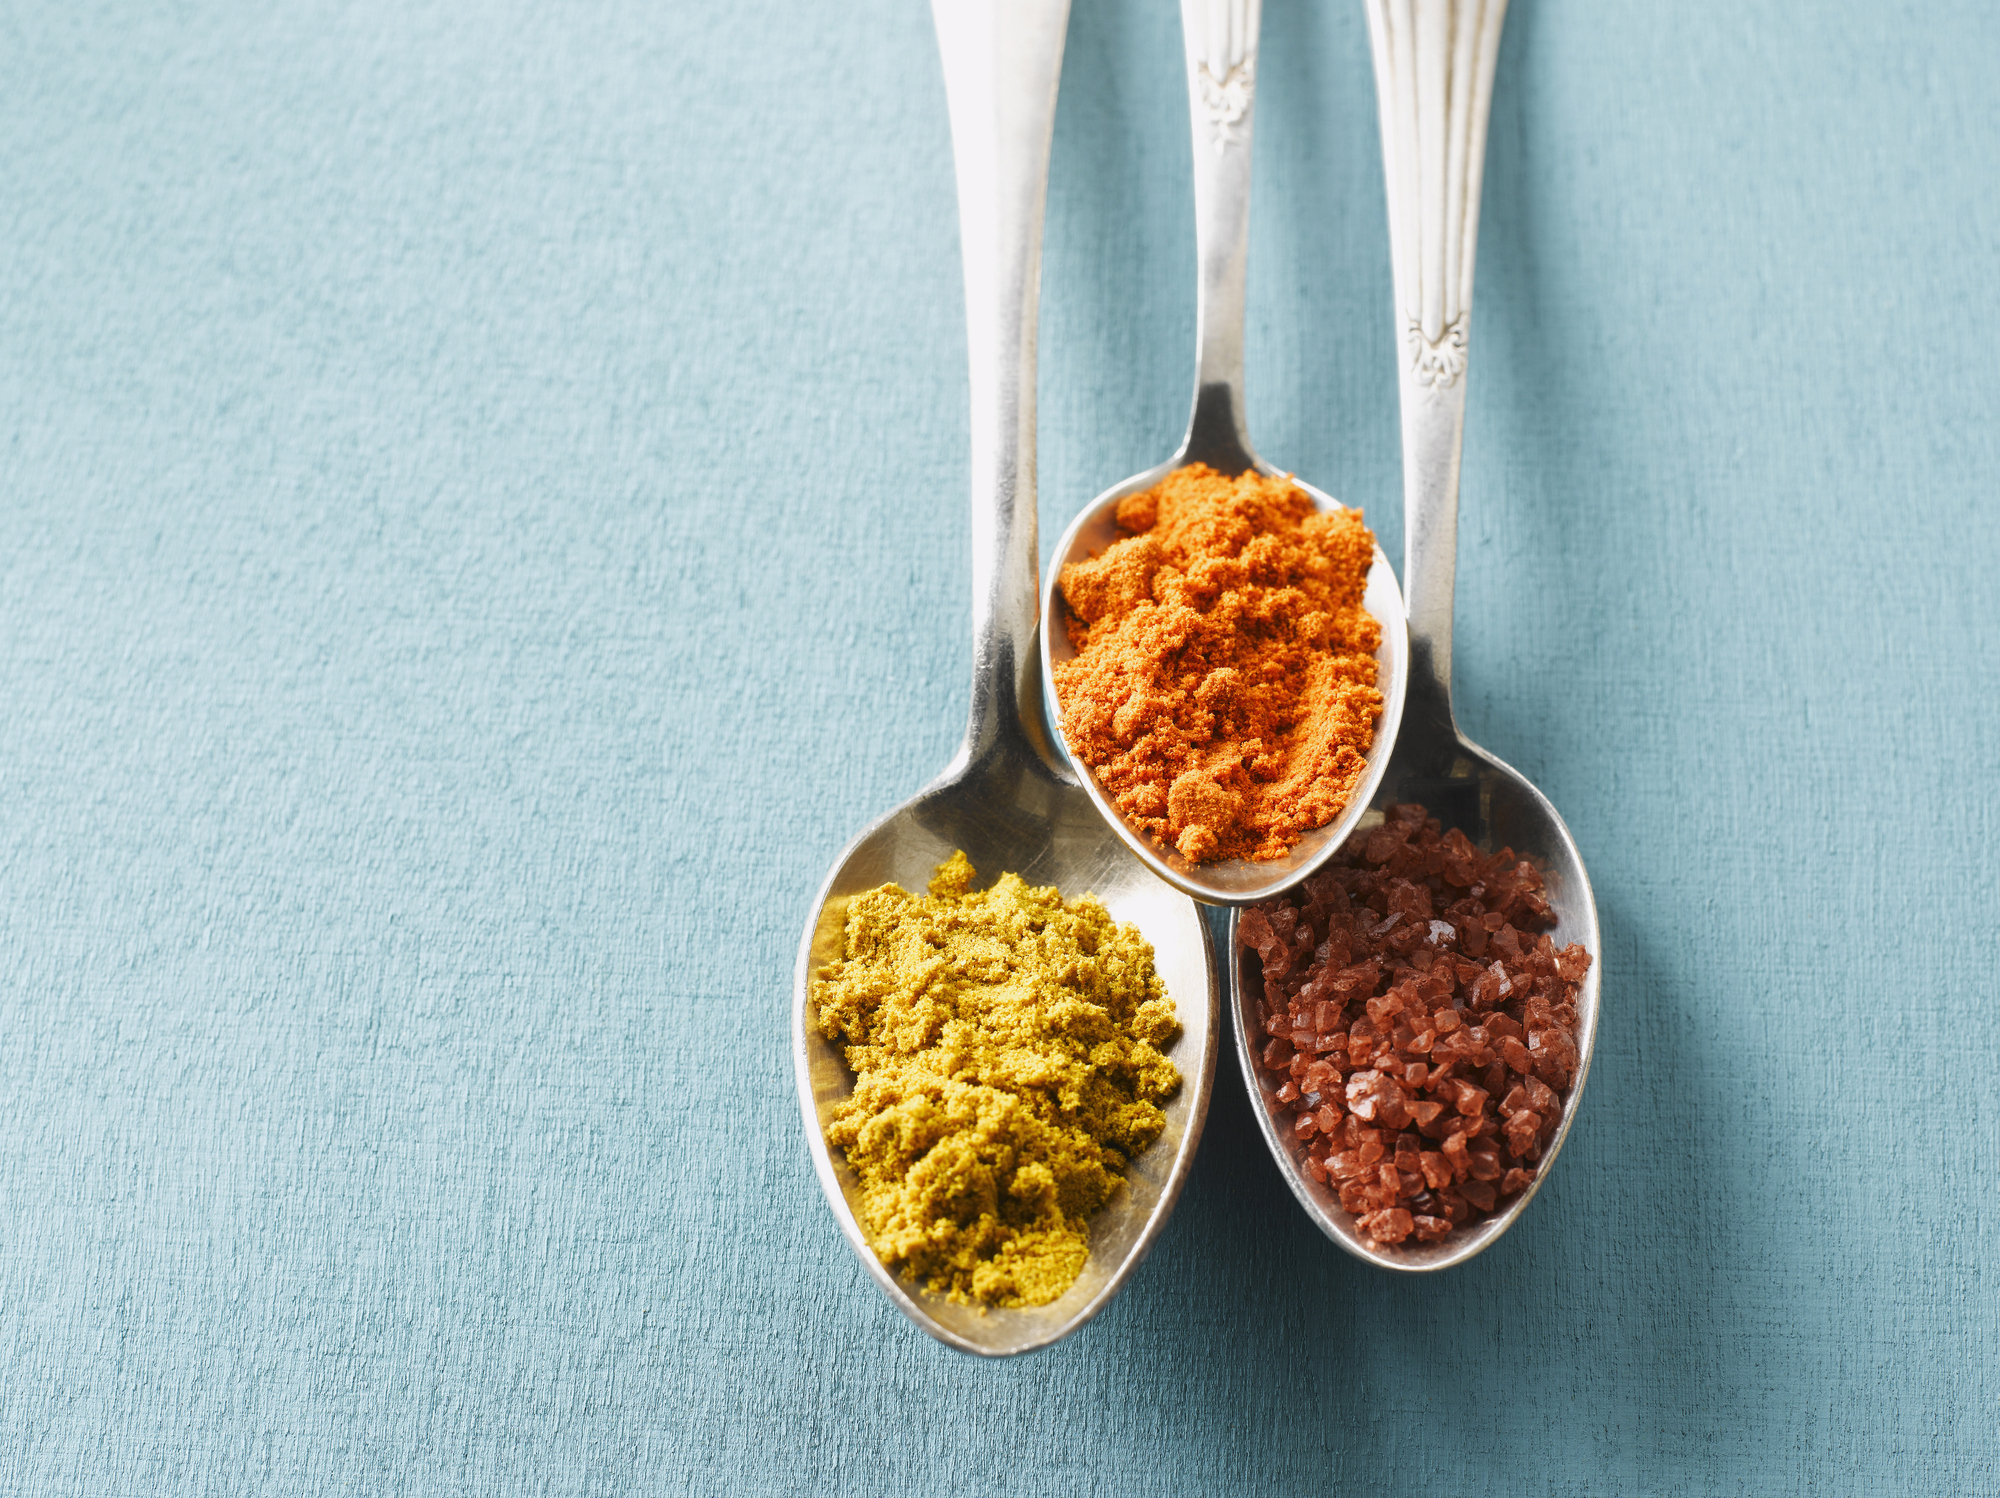 Three spoons holding different spices in each